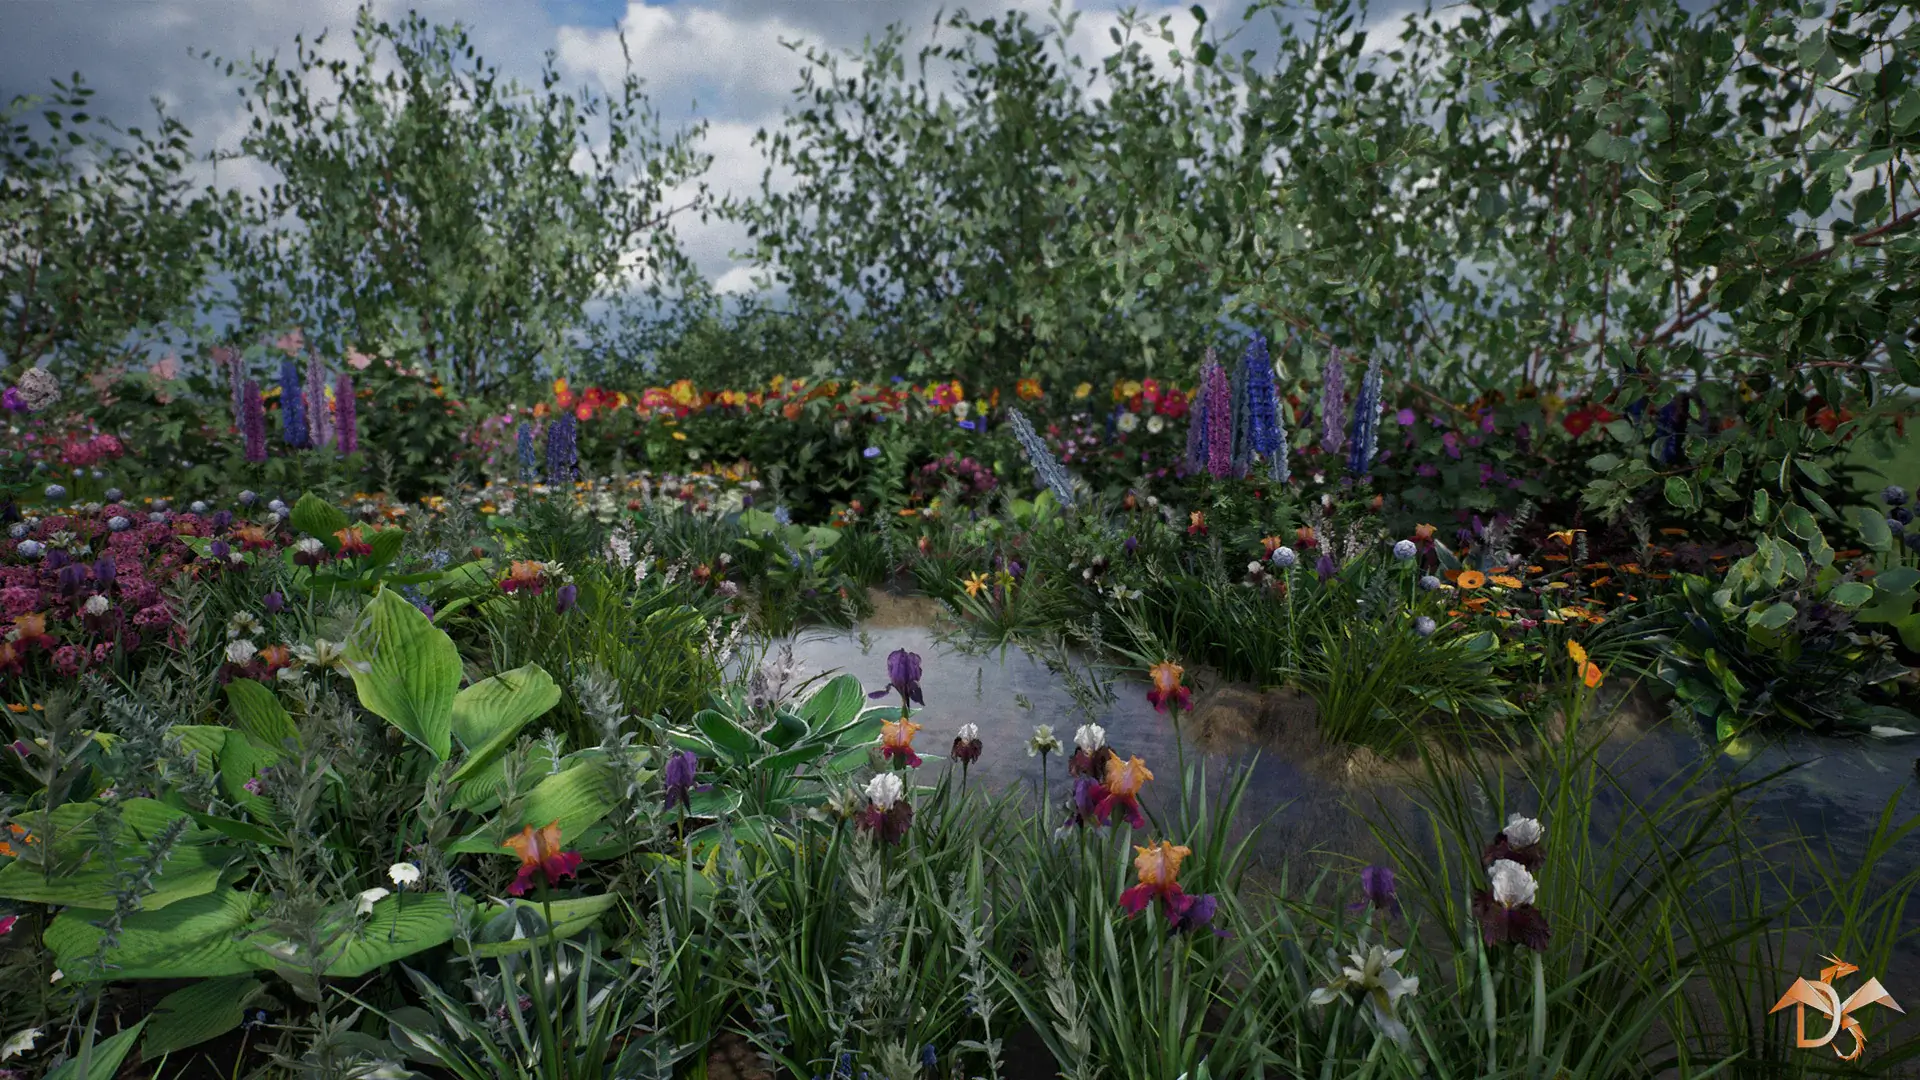 【UE5】花卉与植物自然系列-Flowers and Plants Nature Part 1